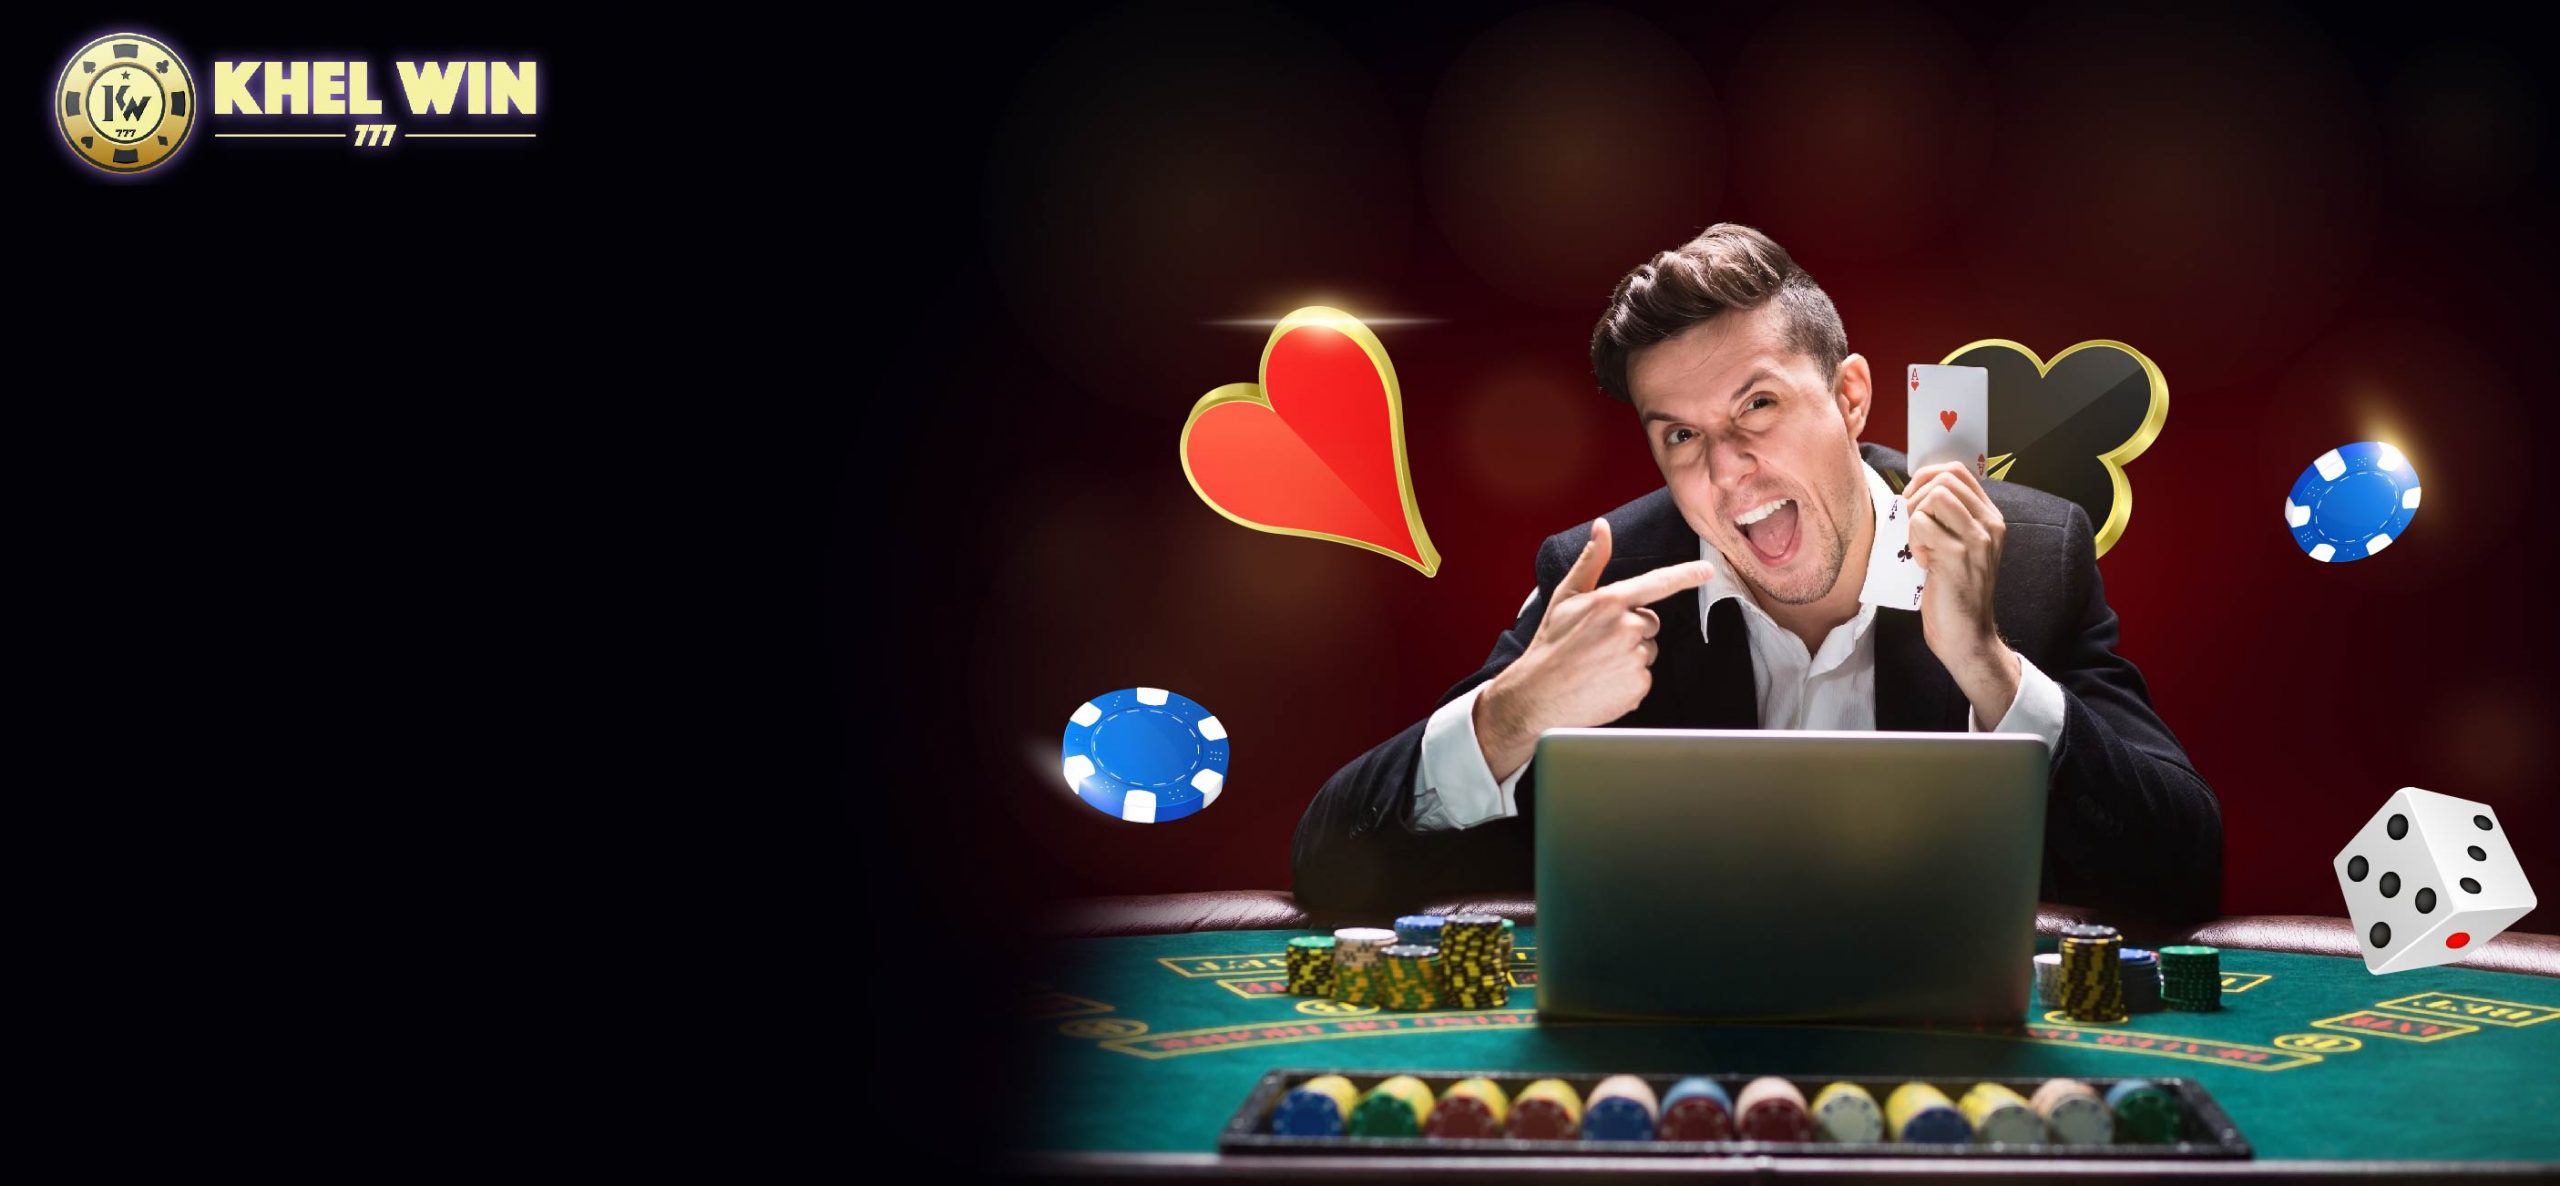 Top 6 things you should consider as an online gambler